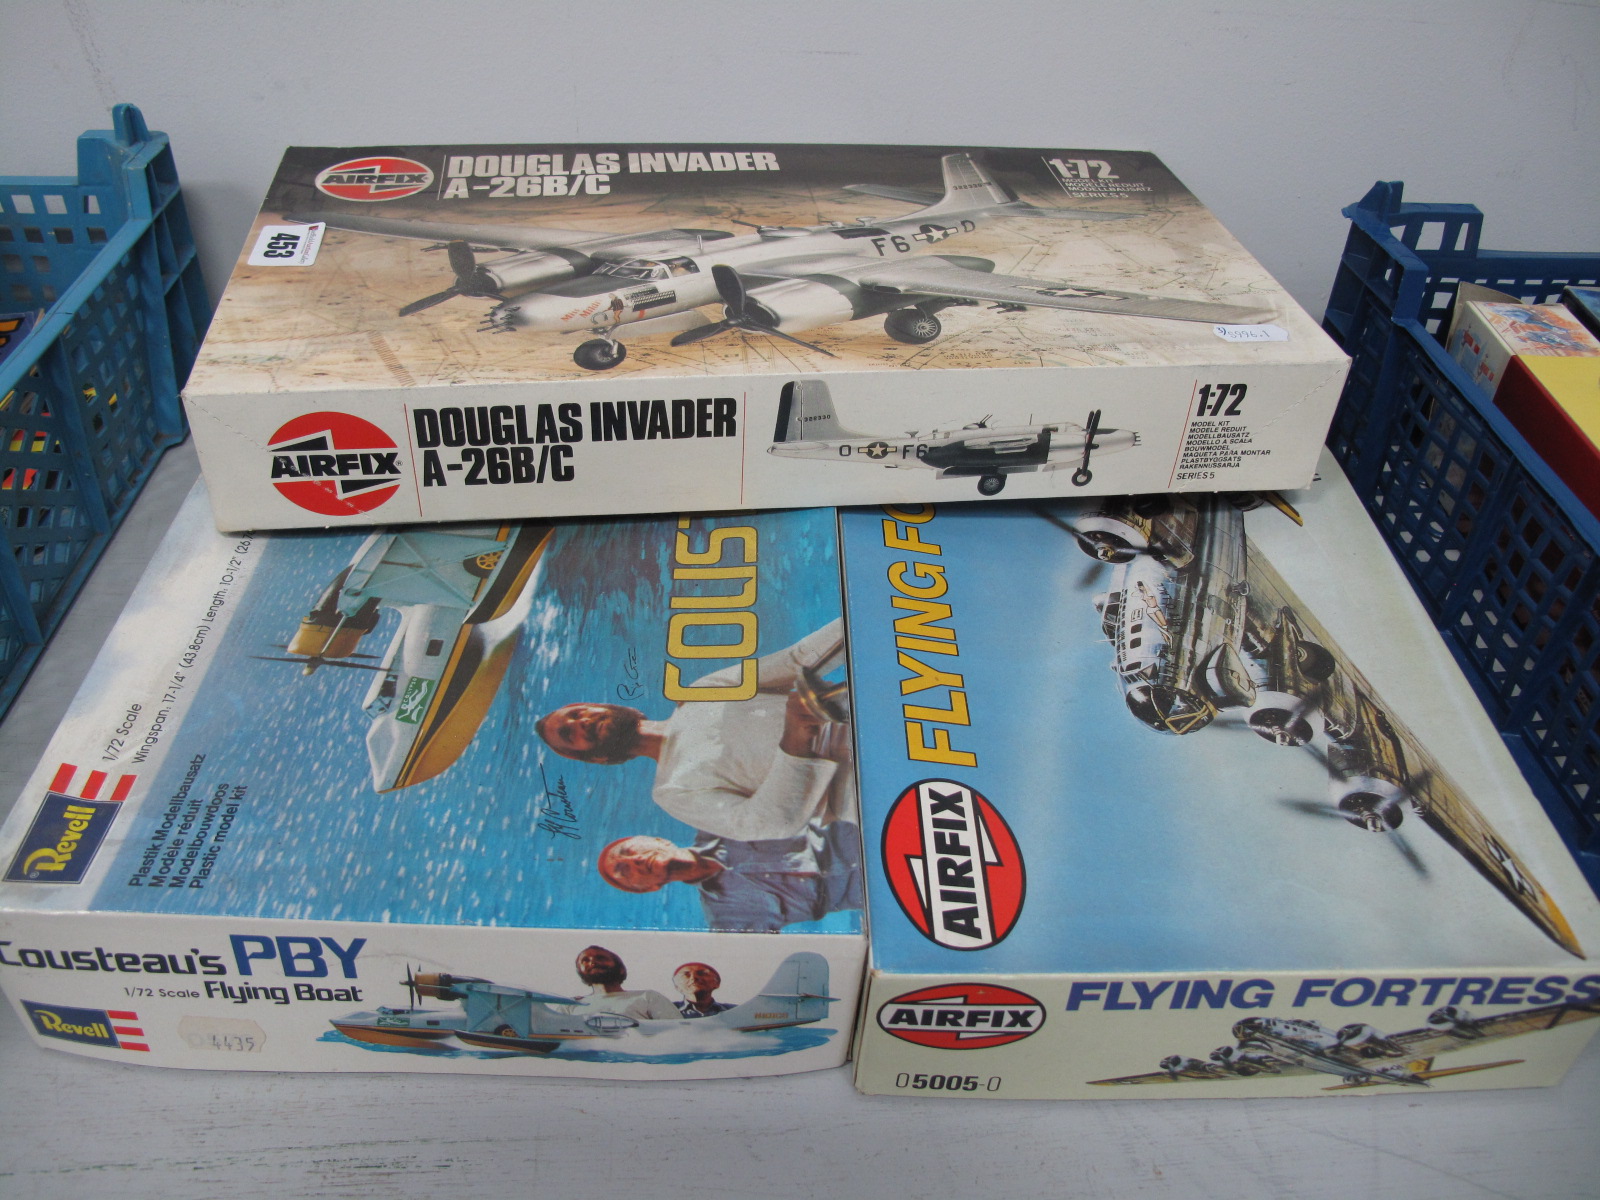 Three 1:72nd Scale Plastic Model Aircraft Kits, to include Airfix Flying Fortress, Airfix Douglas